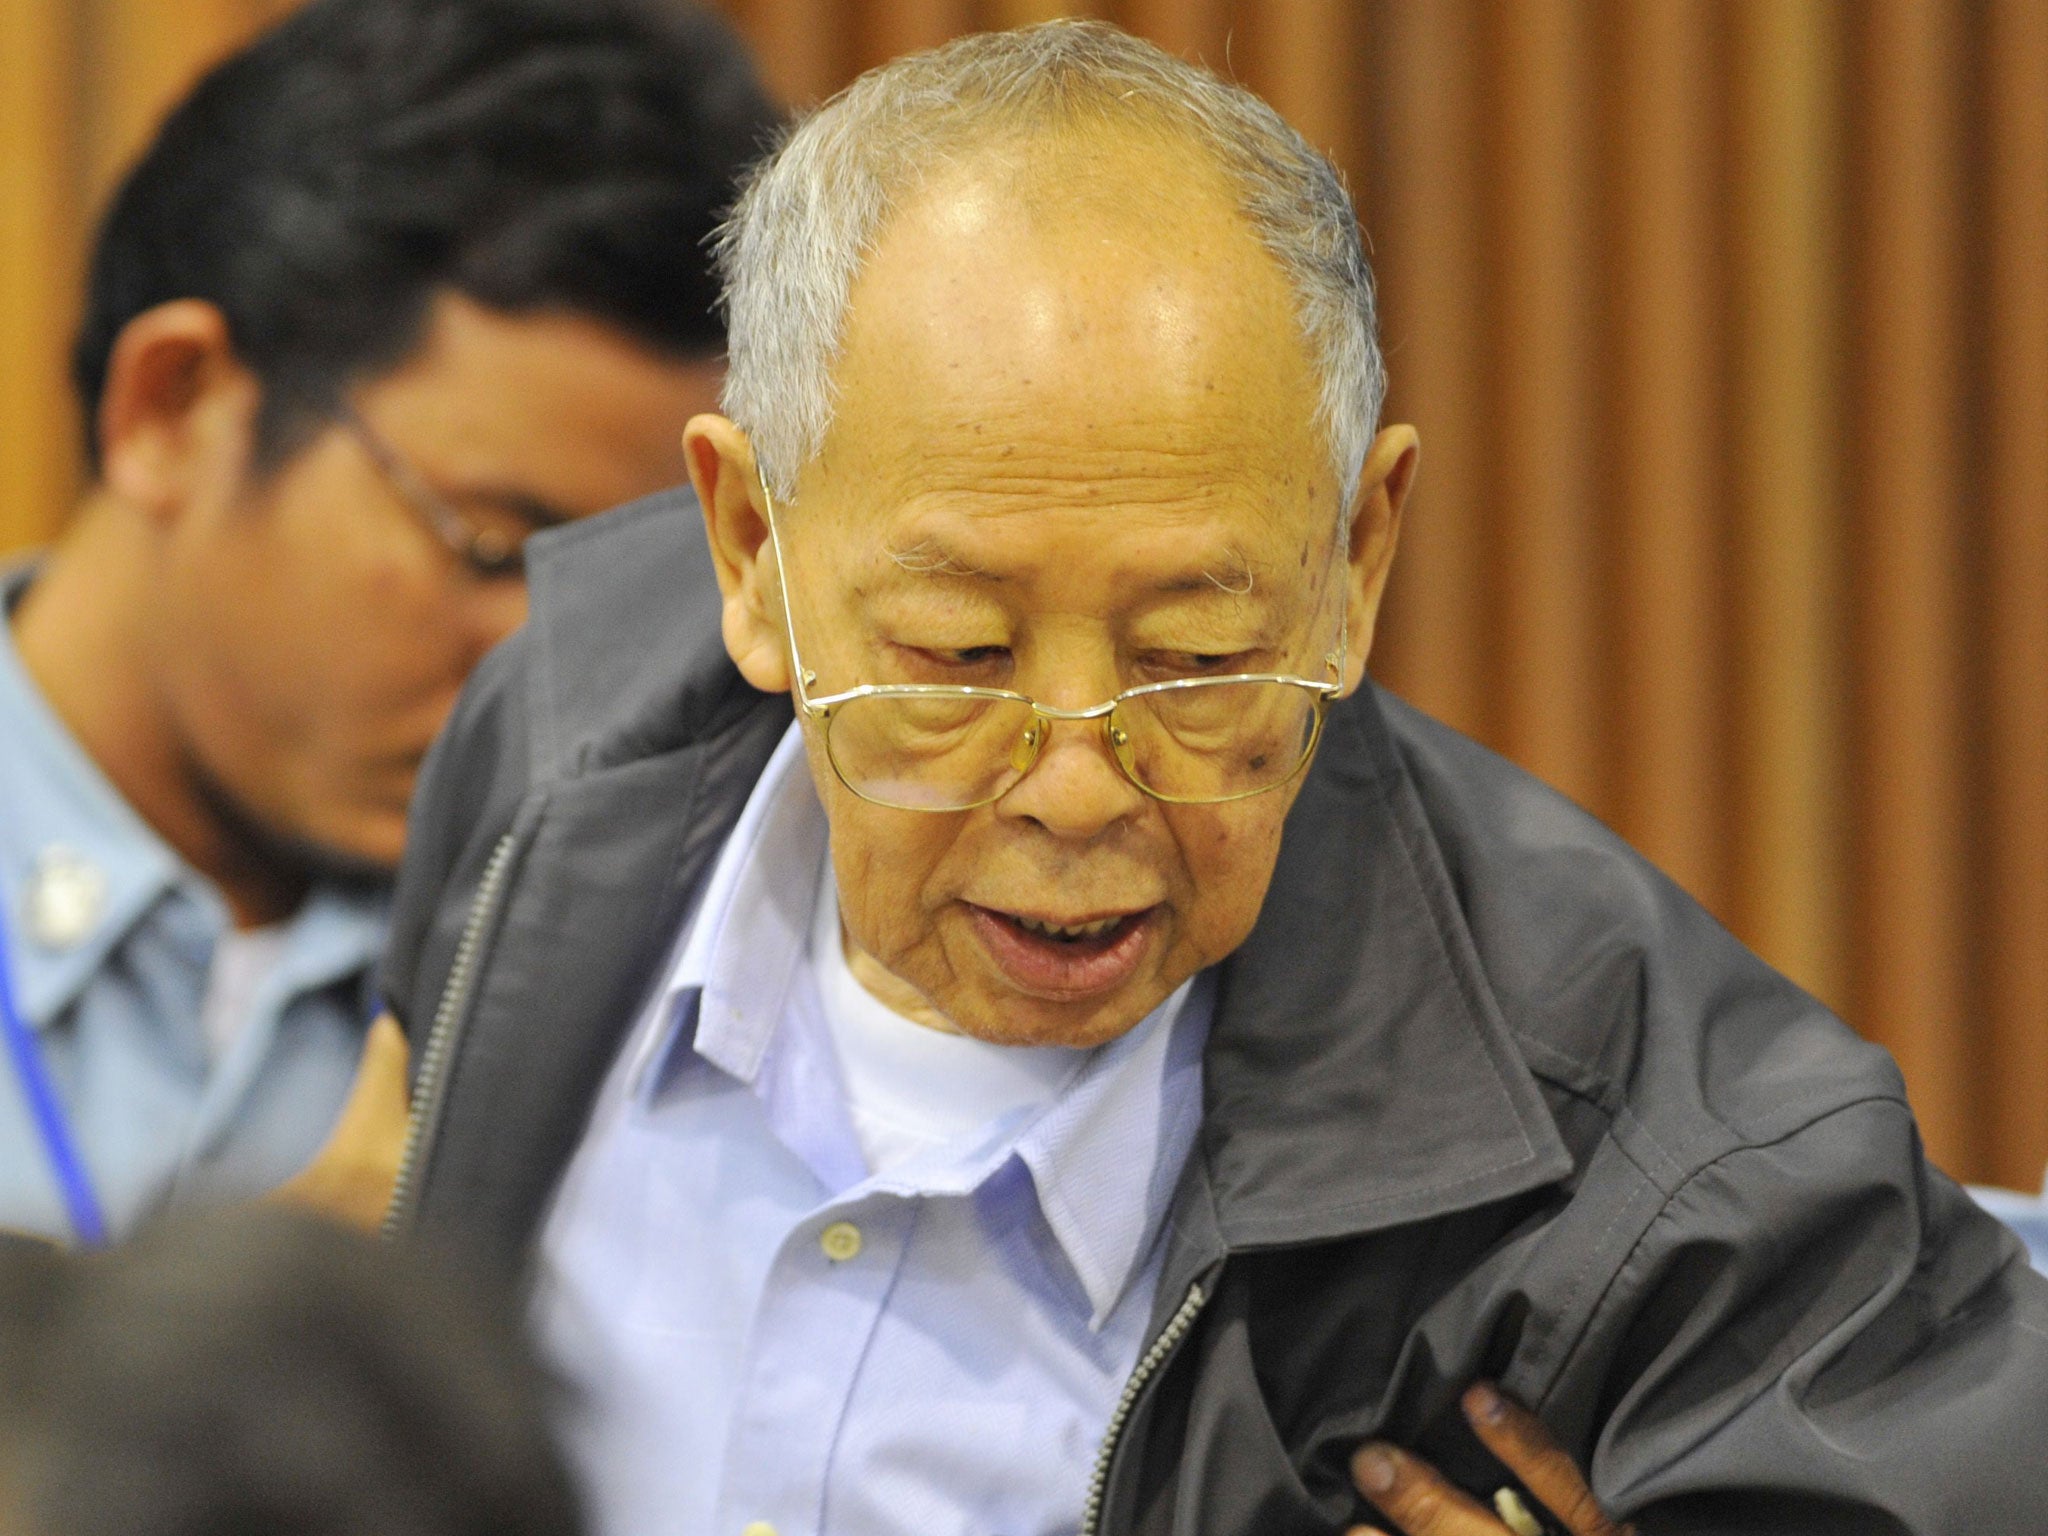 Ieng Sary, who served as foreign minister of the Khmer Rouge regime, has died